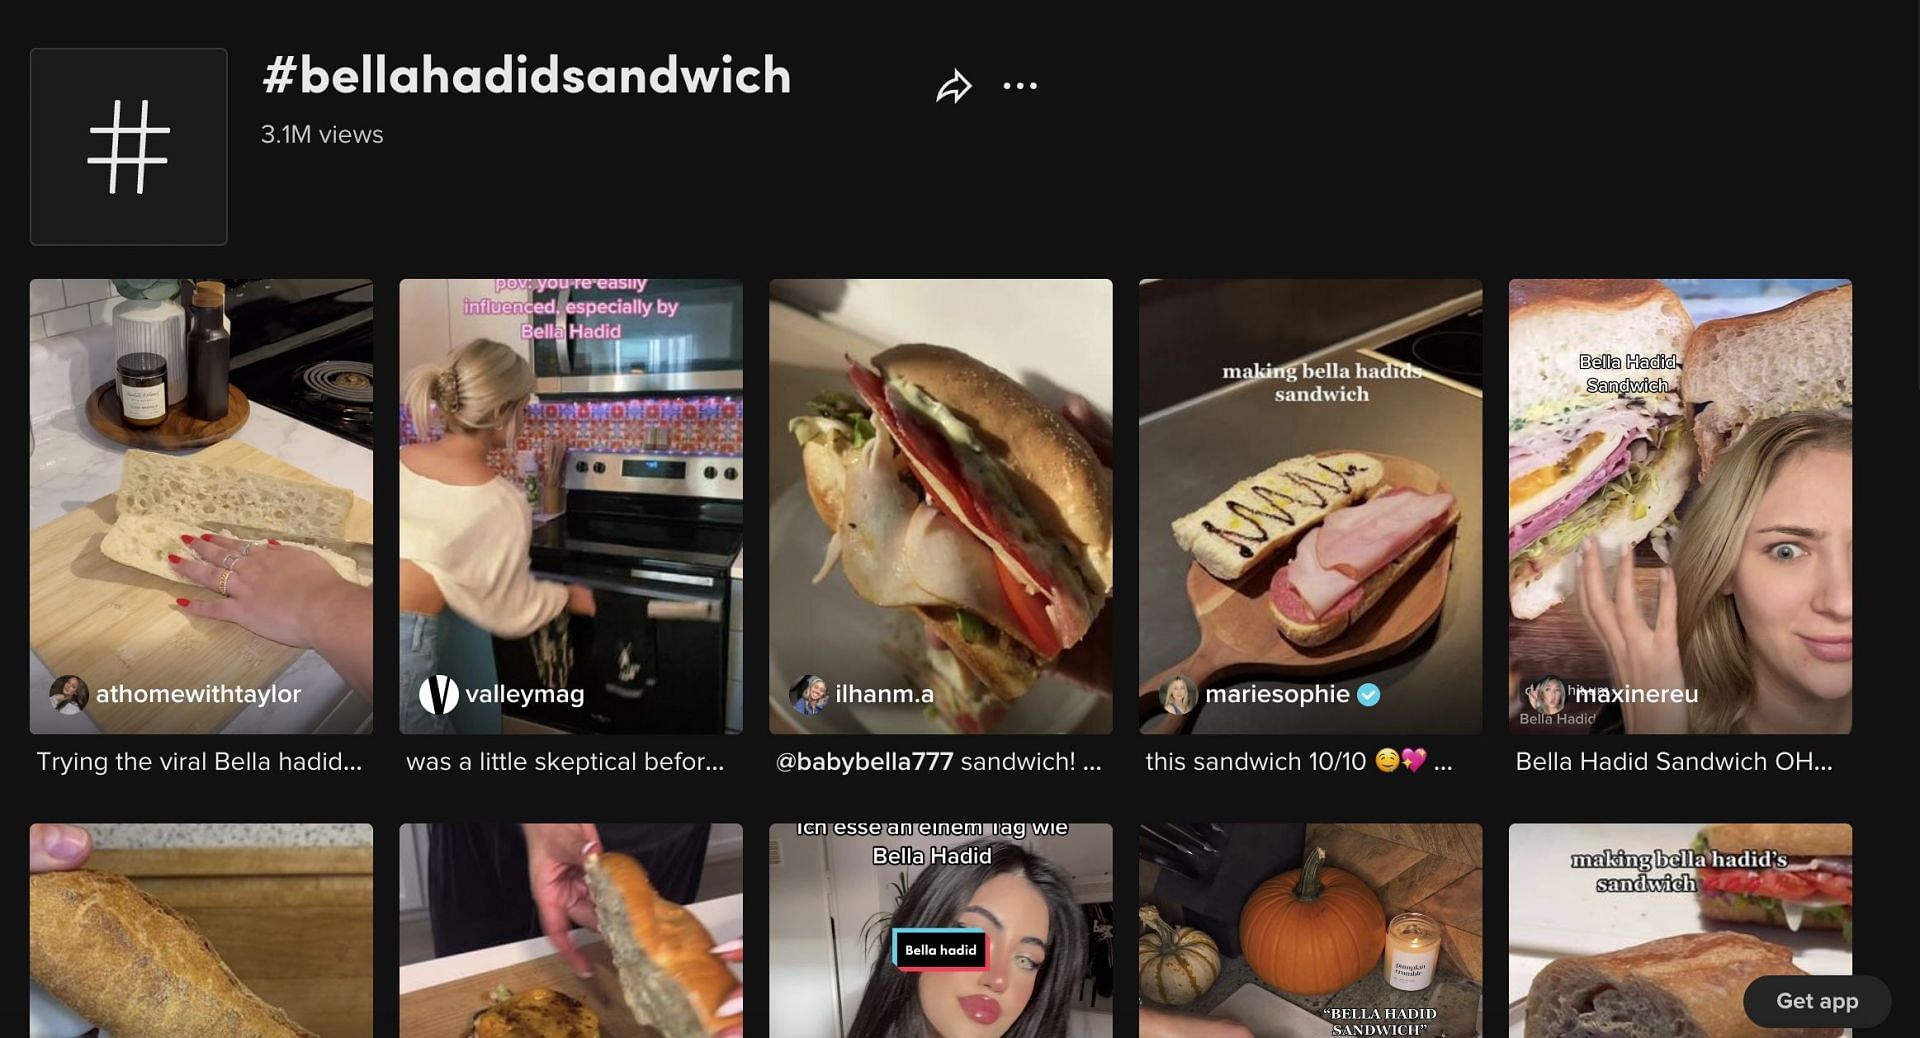 Netizens are creating their versions of the Bella Hadid sandwich; the hashtag receives more than 3 million views in a few days. (Image via TikTok)